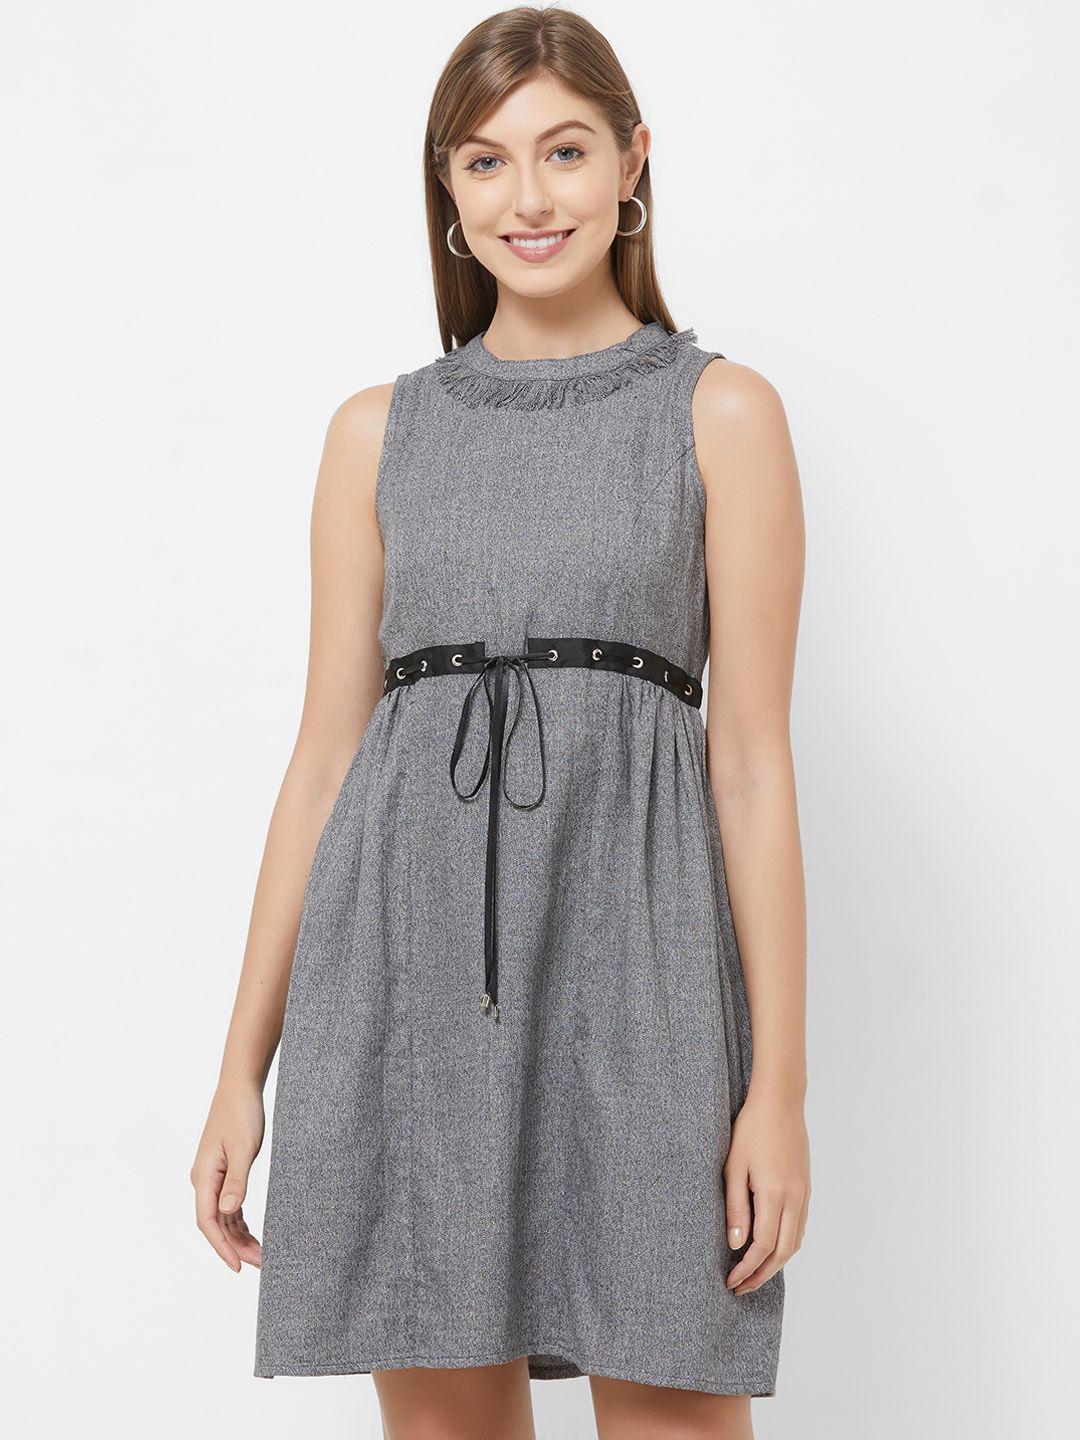 109f women grey printed fit and flare dress